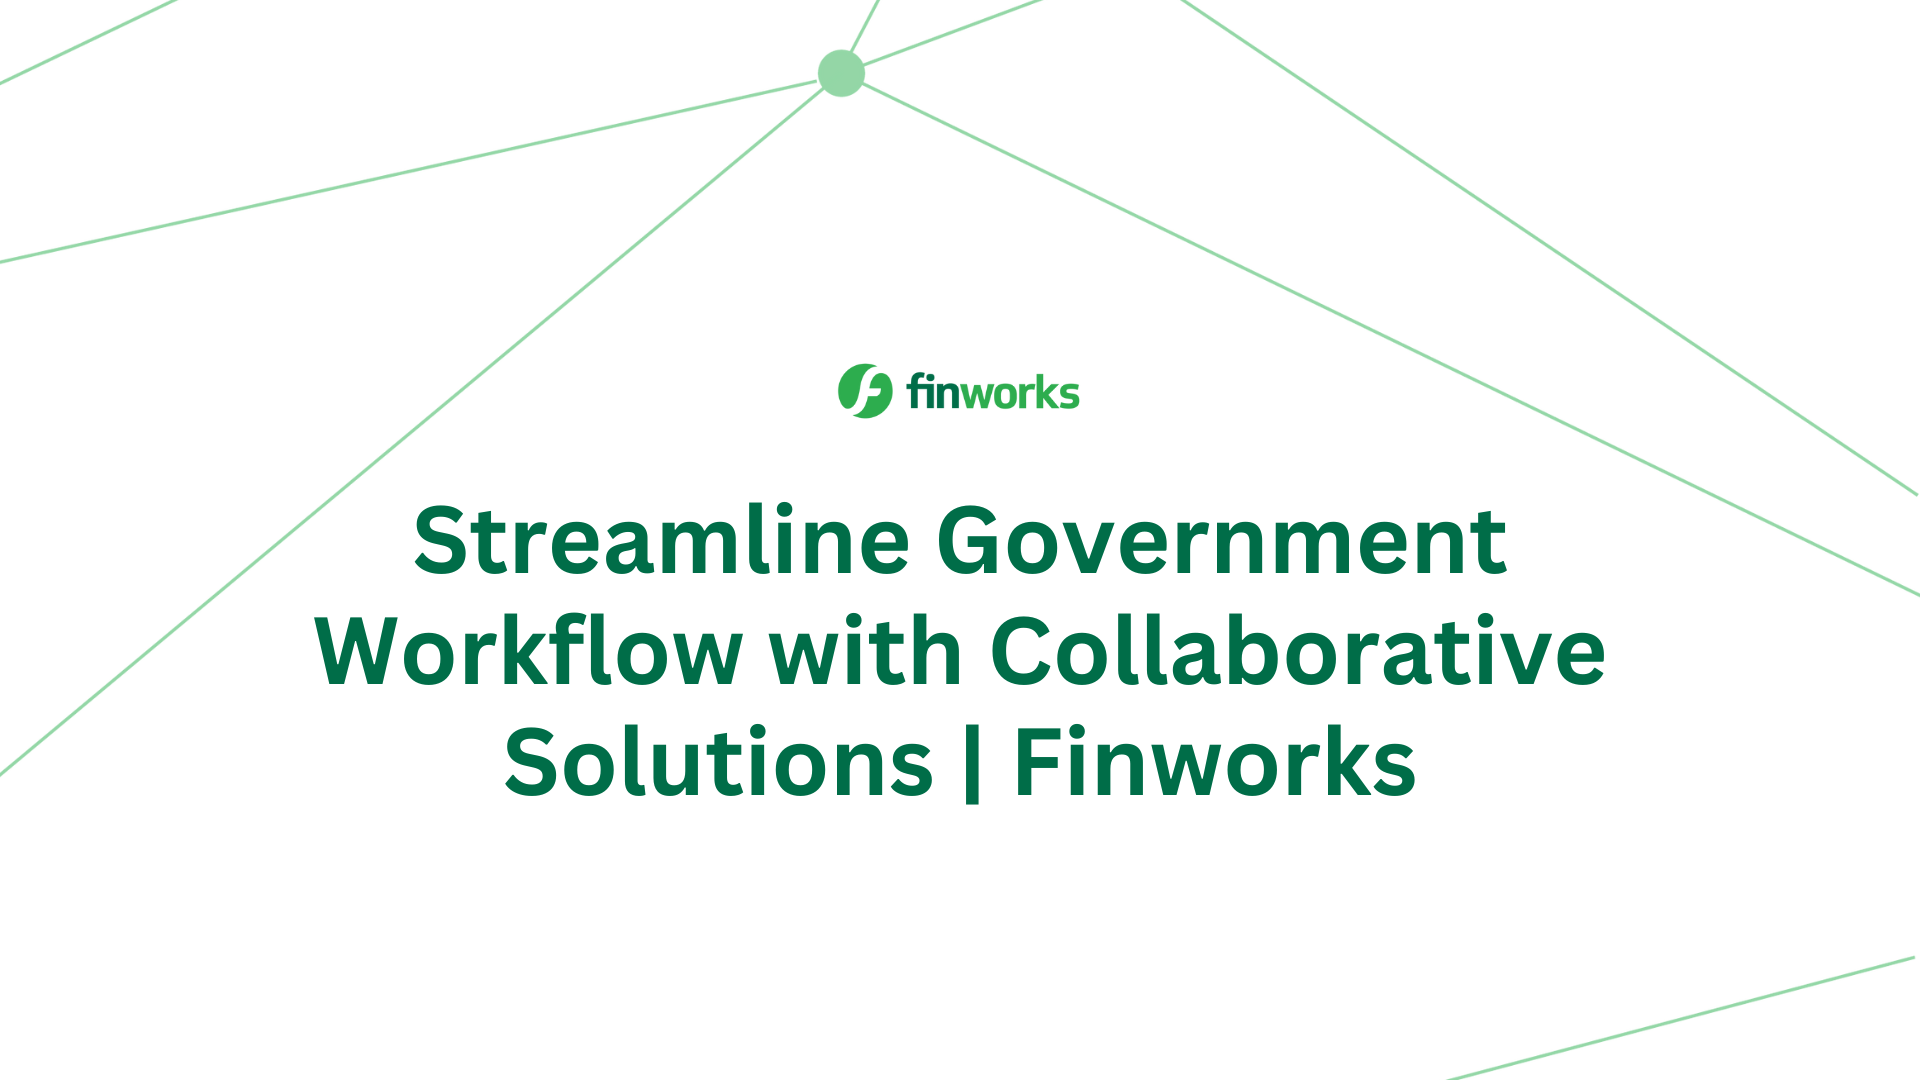 Streamline Government Workflow with Collaborative Solutions | Finworks  